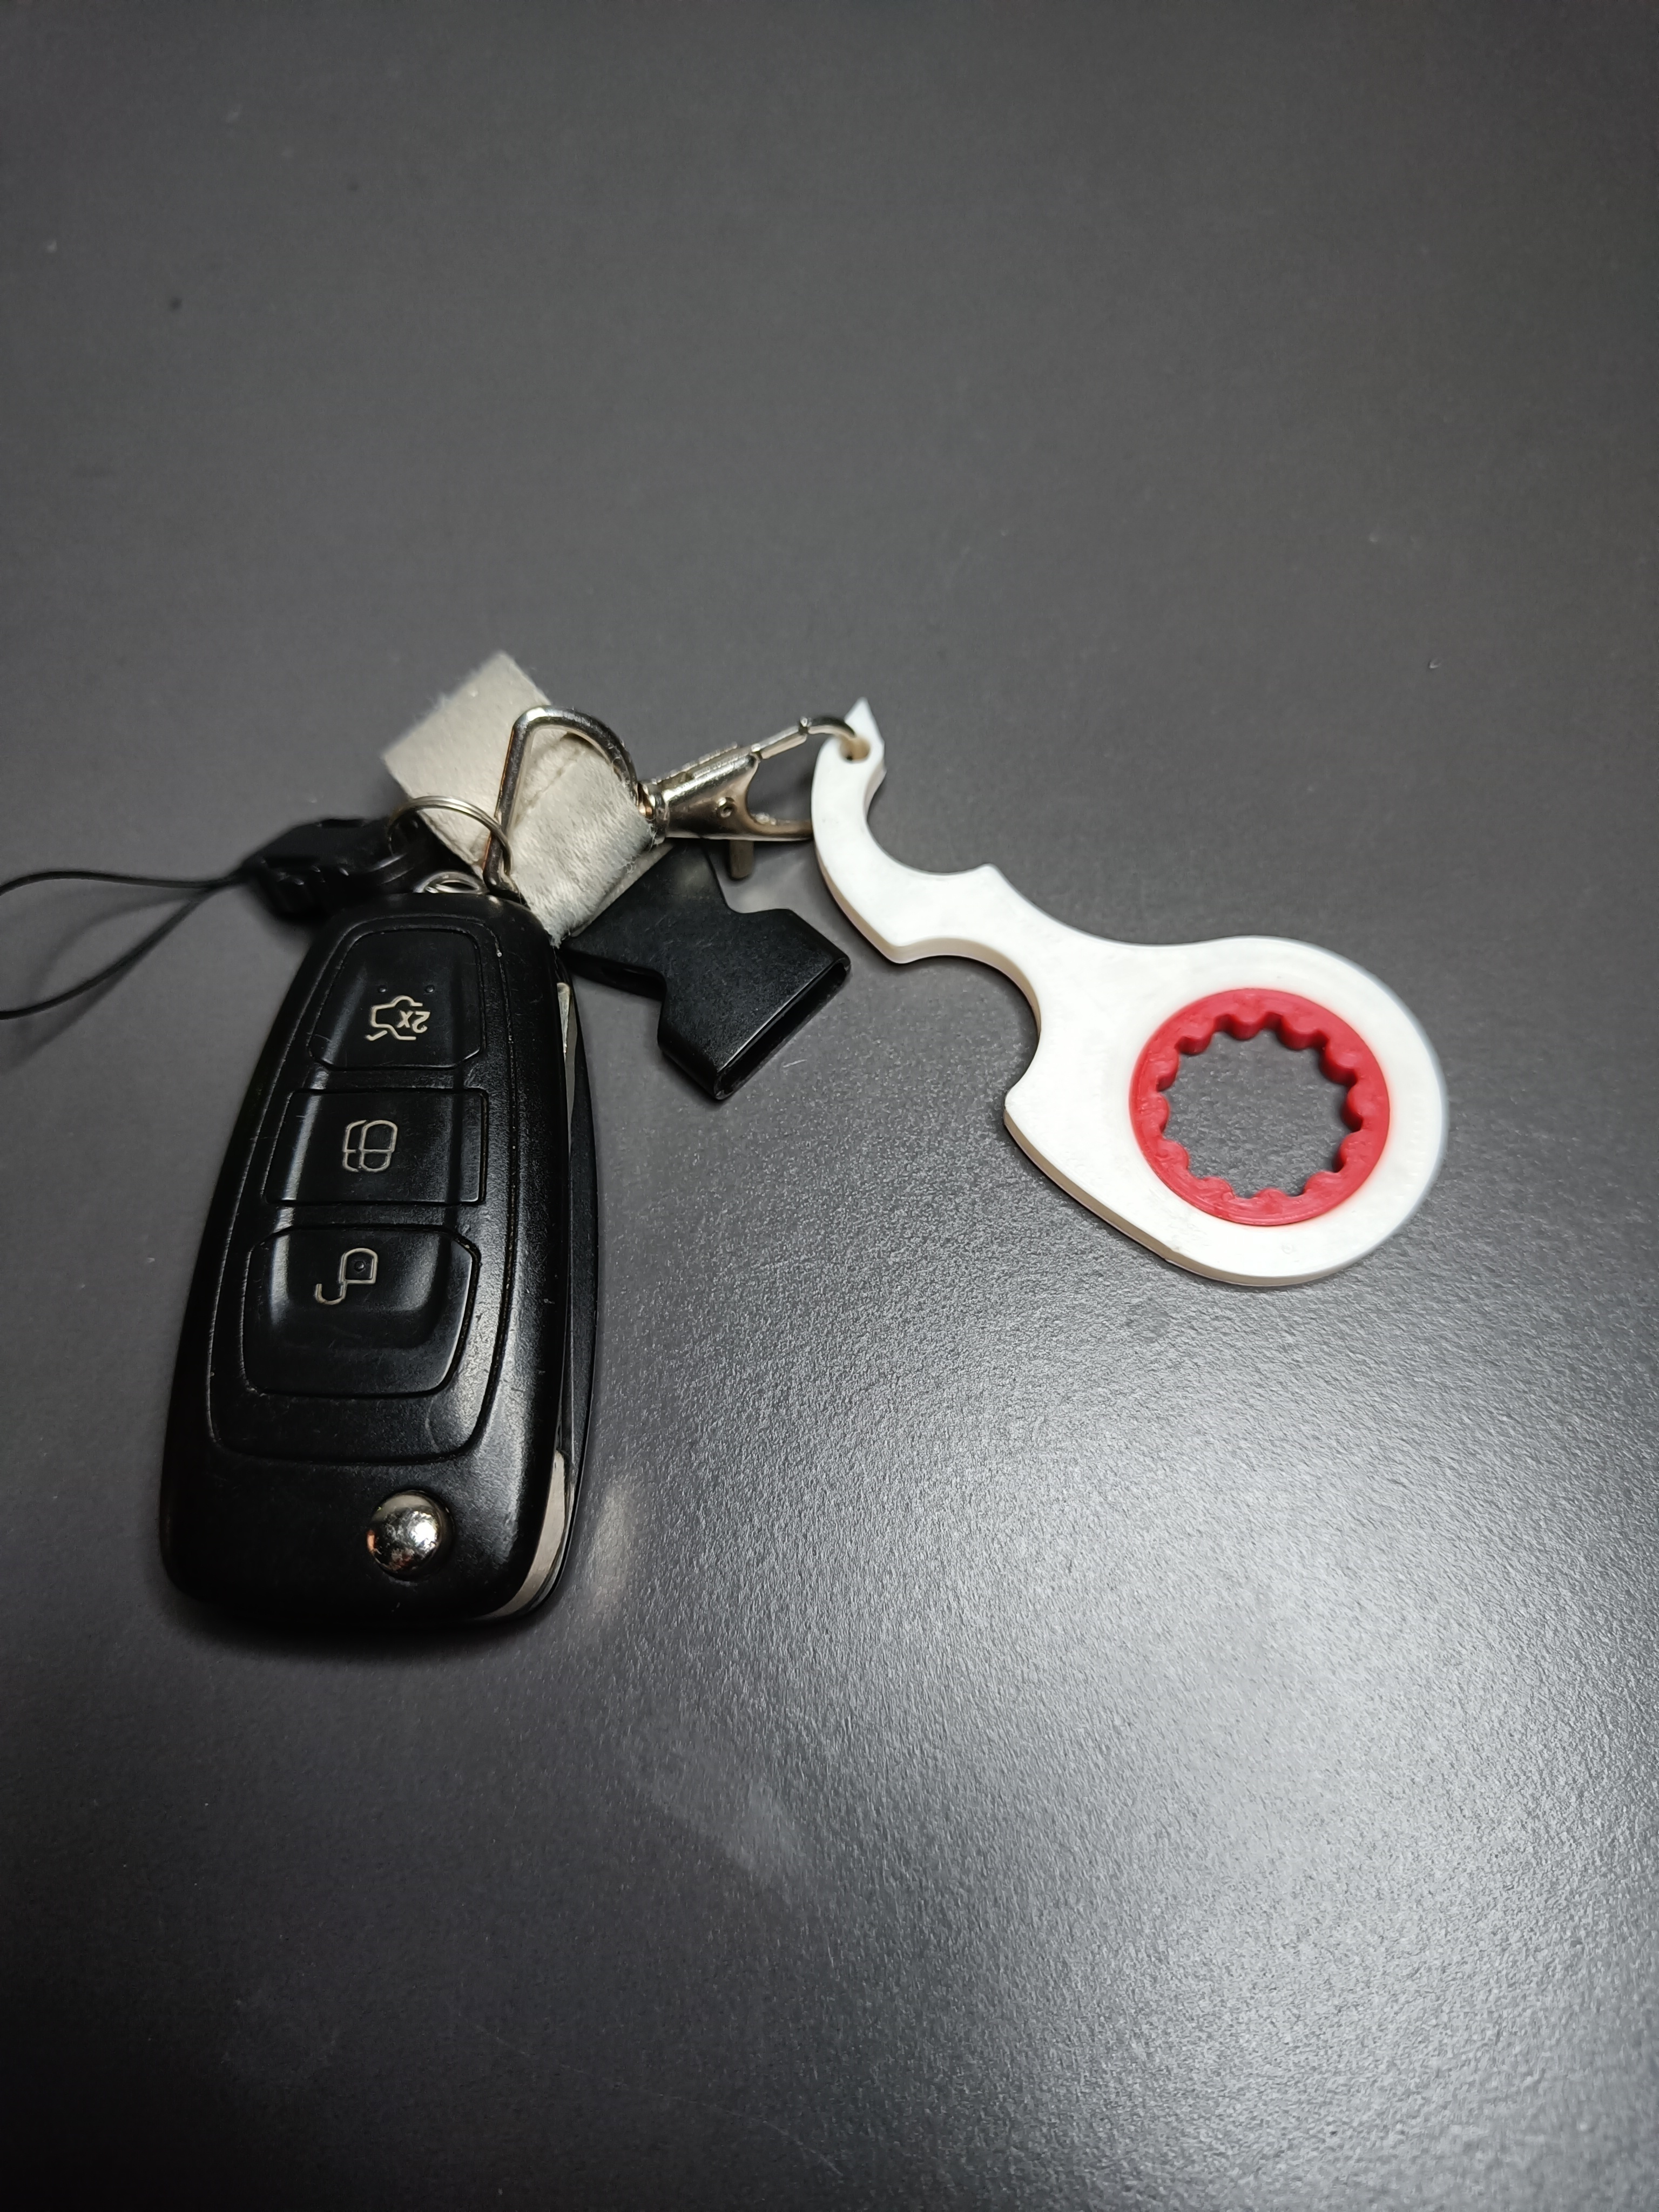 KARAMBIT KEYCHAIN SPINNER PRINT IN PLACE : r/cults3d